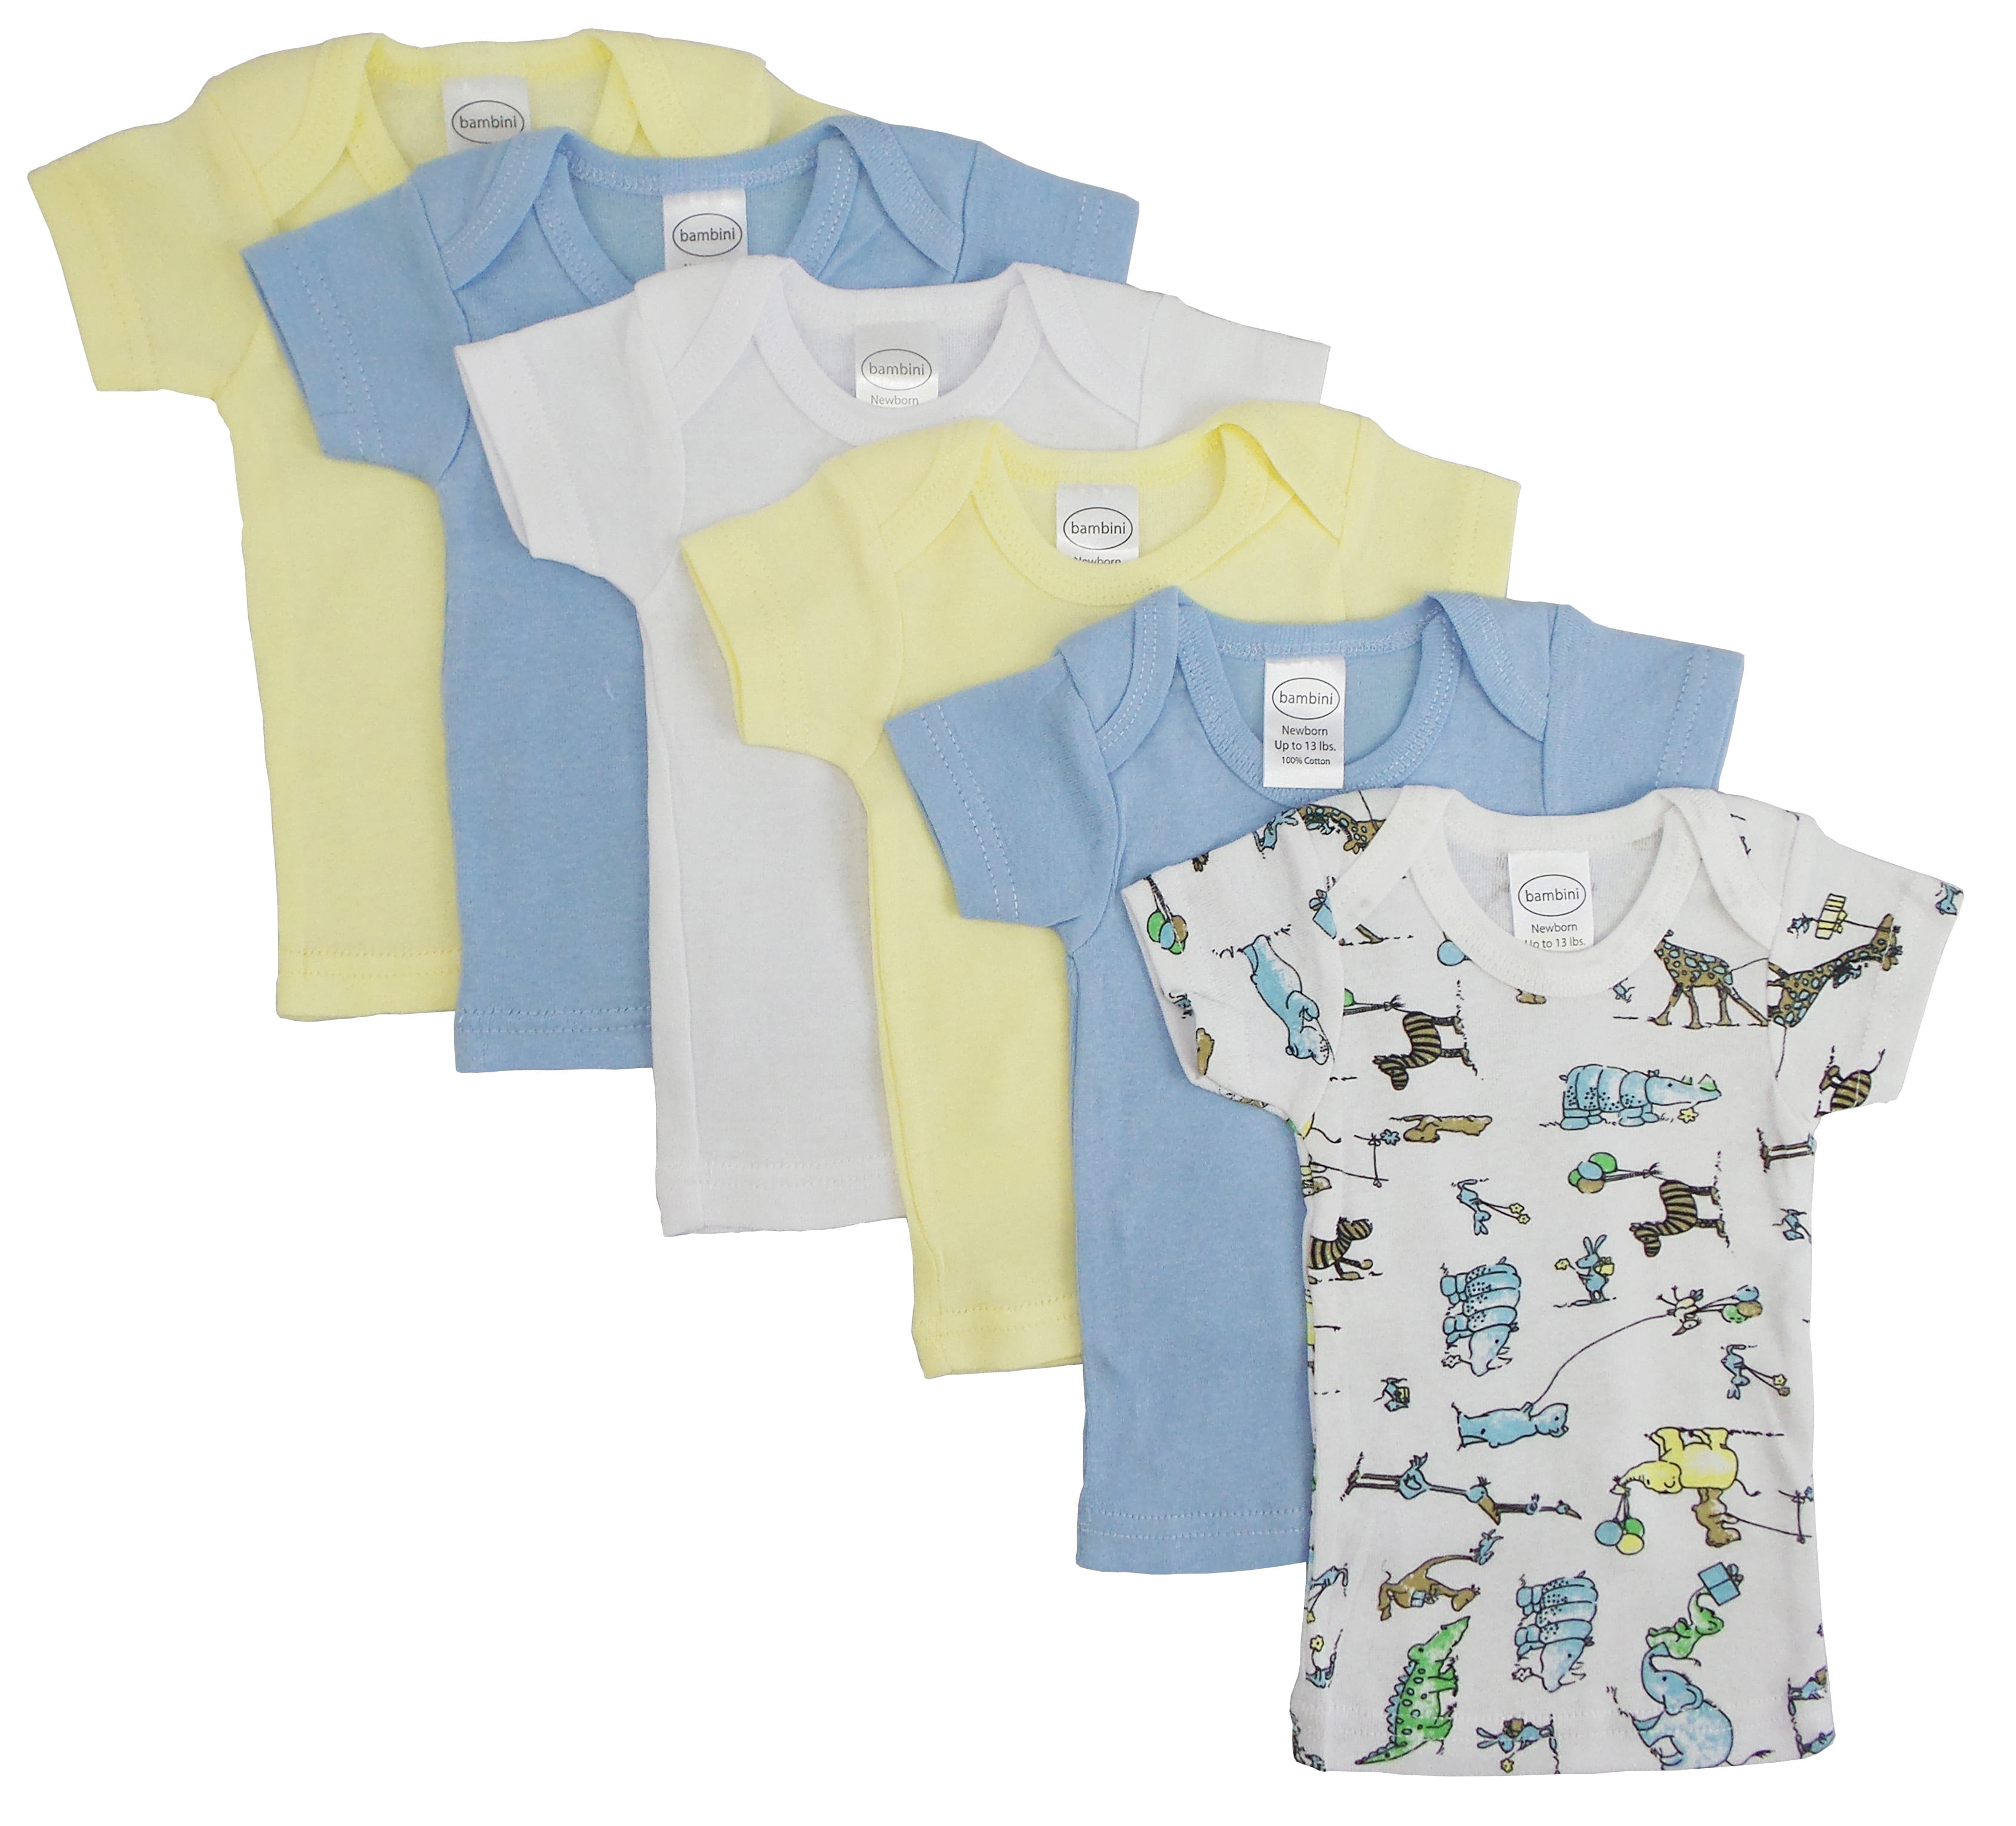 Cs-056s-058s Boys Pastel Variety Short Sleeve Lap T-shirts, Assorted & Printed- Small